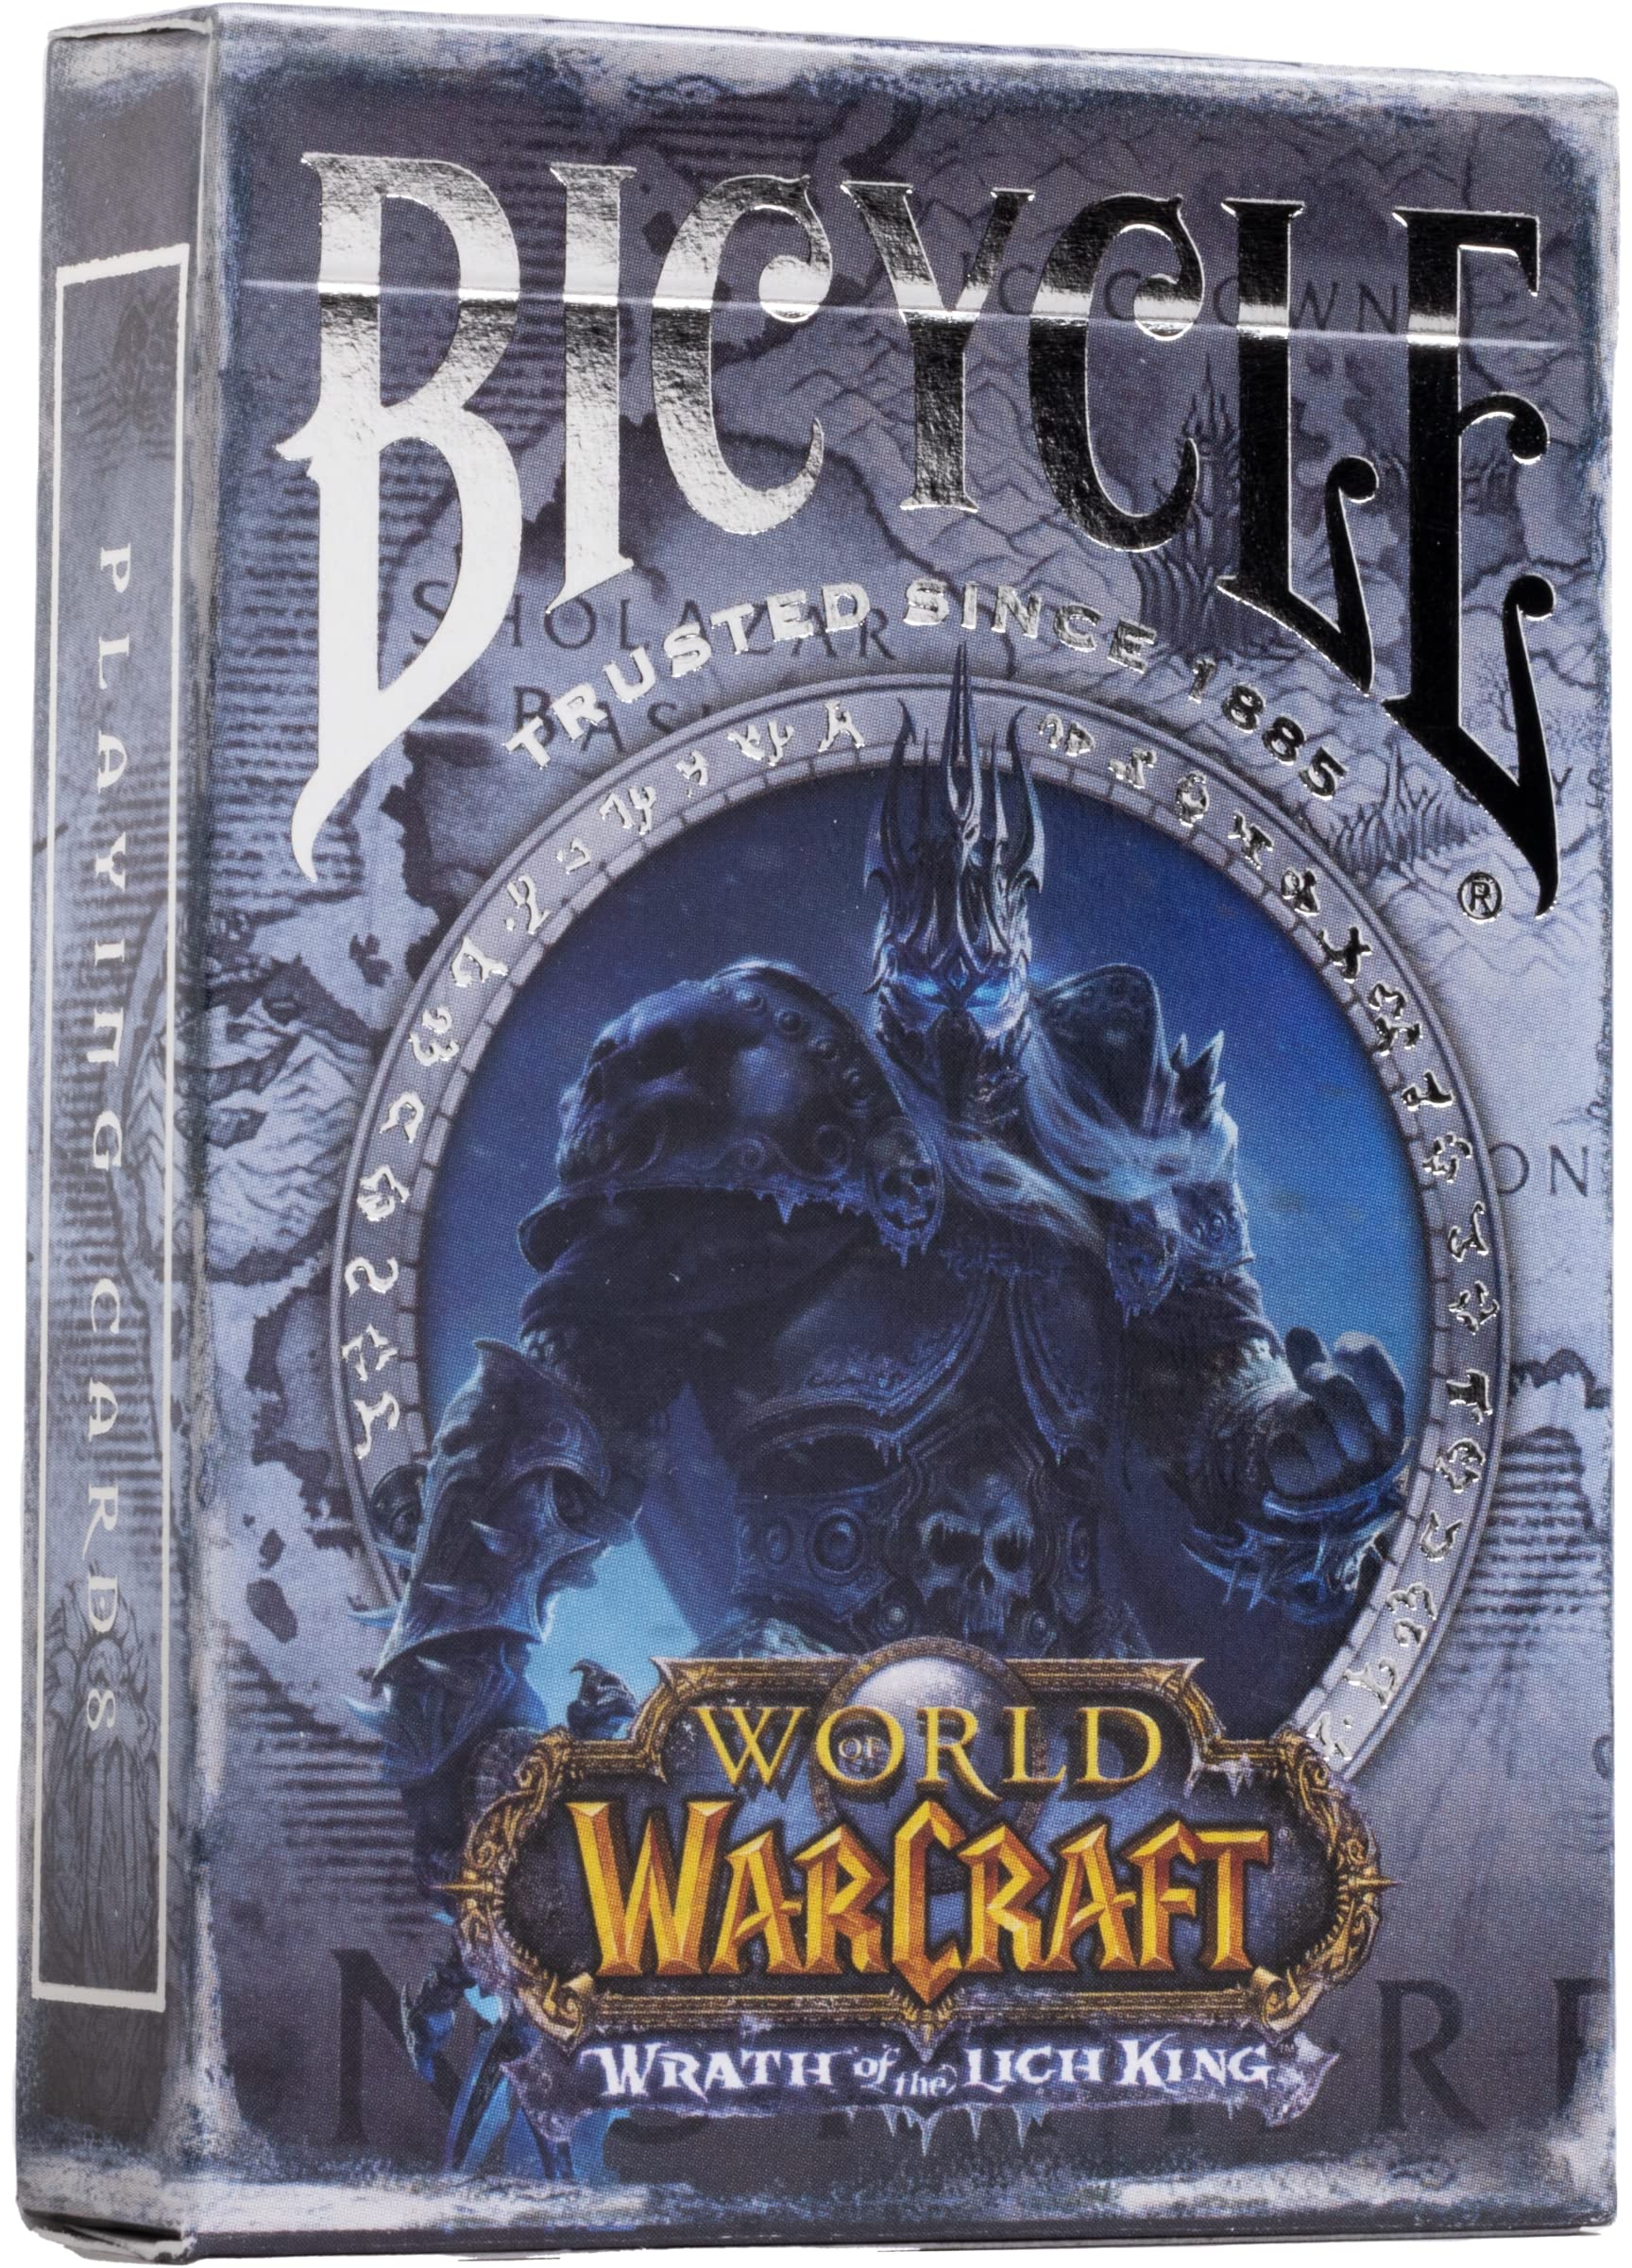 Bicycle World of Warcraft - Wrath of The Lich King